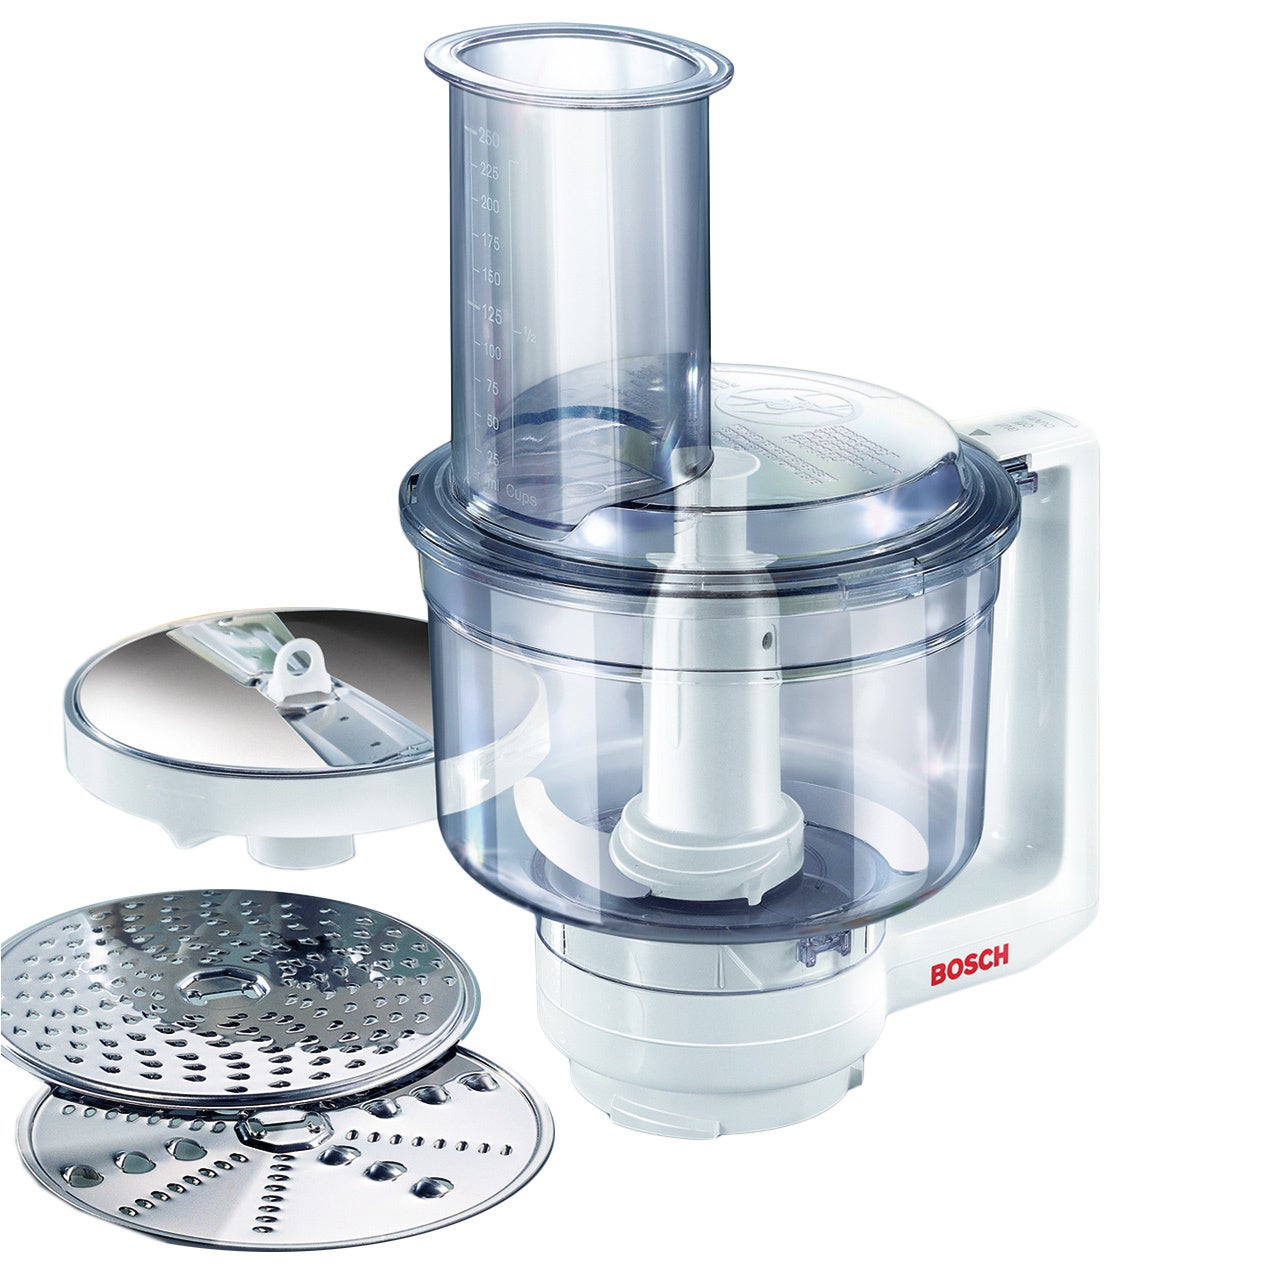 http://cooksonmain.com/cdn/shop/products/White-Bosch-Food-Processor-Attachment-for-Universal-Plus-Mixer-9206407e-565e-40f1-8a28-f6fb3e6c7e5f.jpg?v=1609188975&width=2048